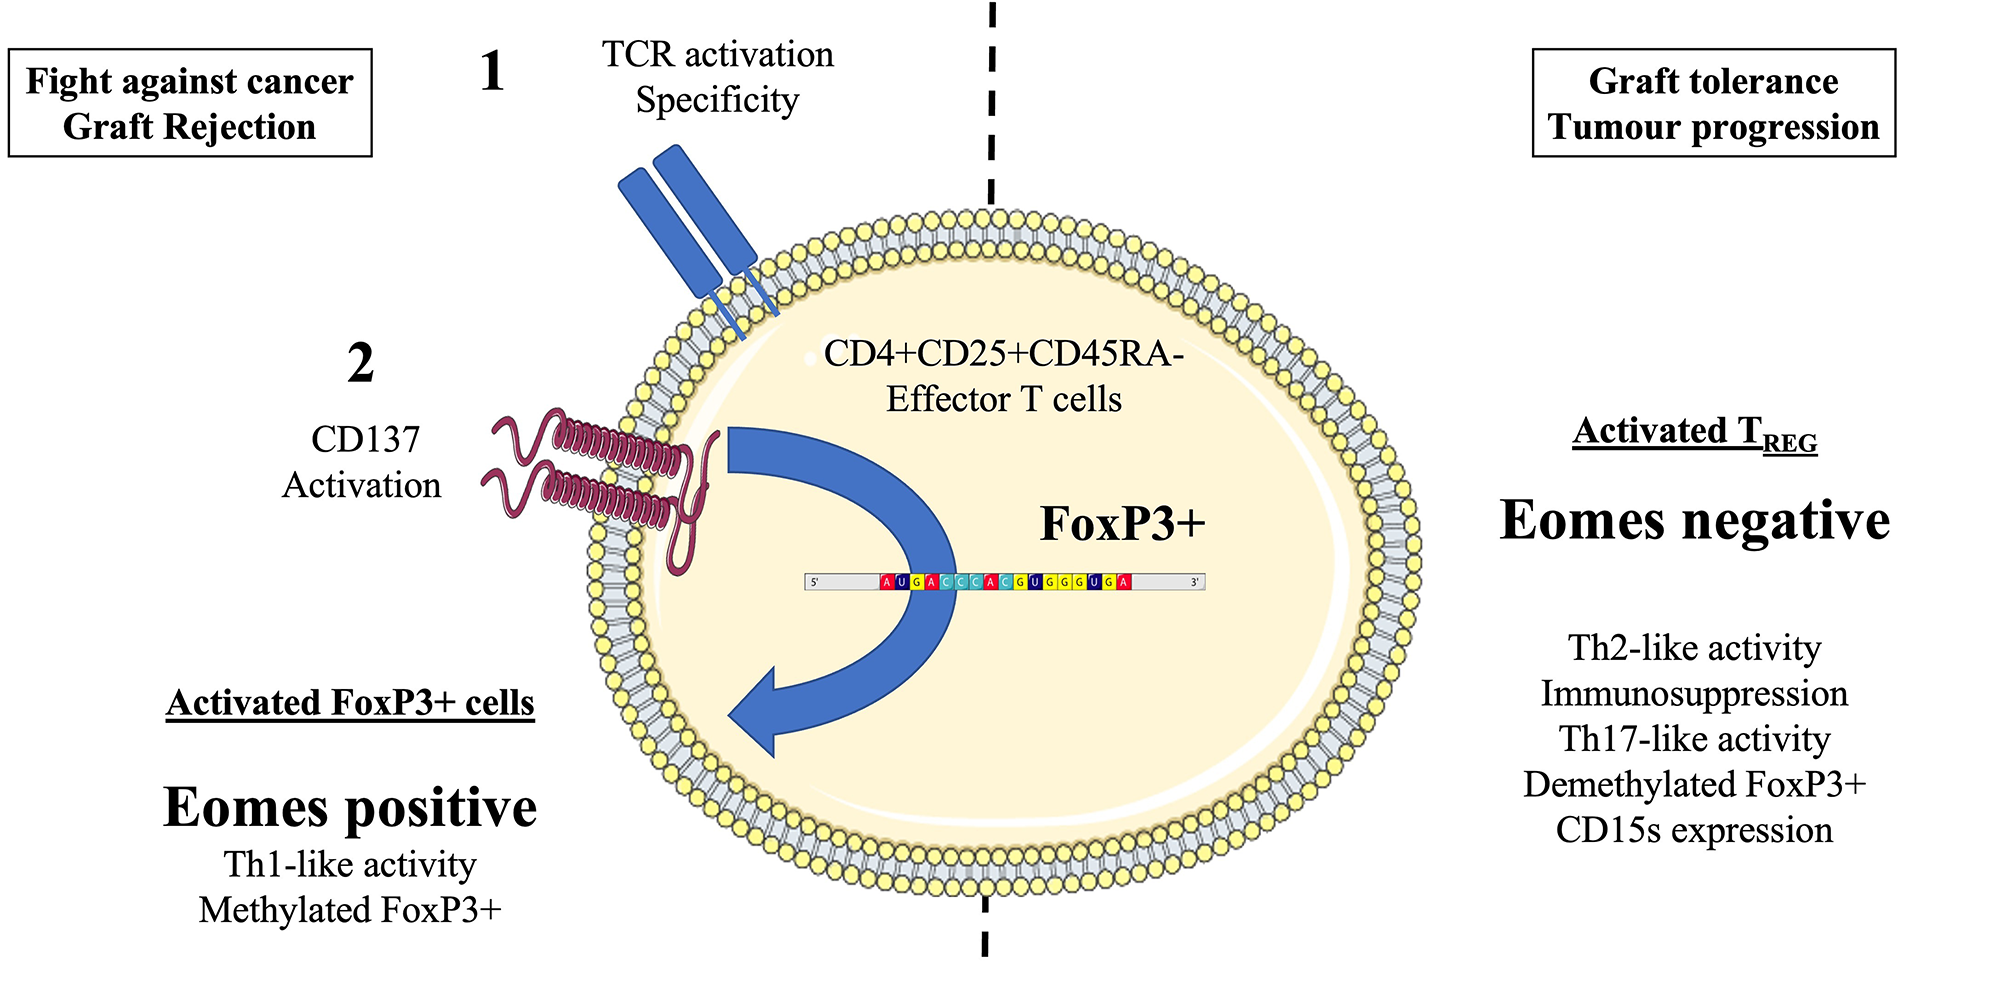 Hypothesis of a CD137/Eomes activating axis for effector T cells in HPV oropharyngeal cancers